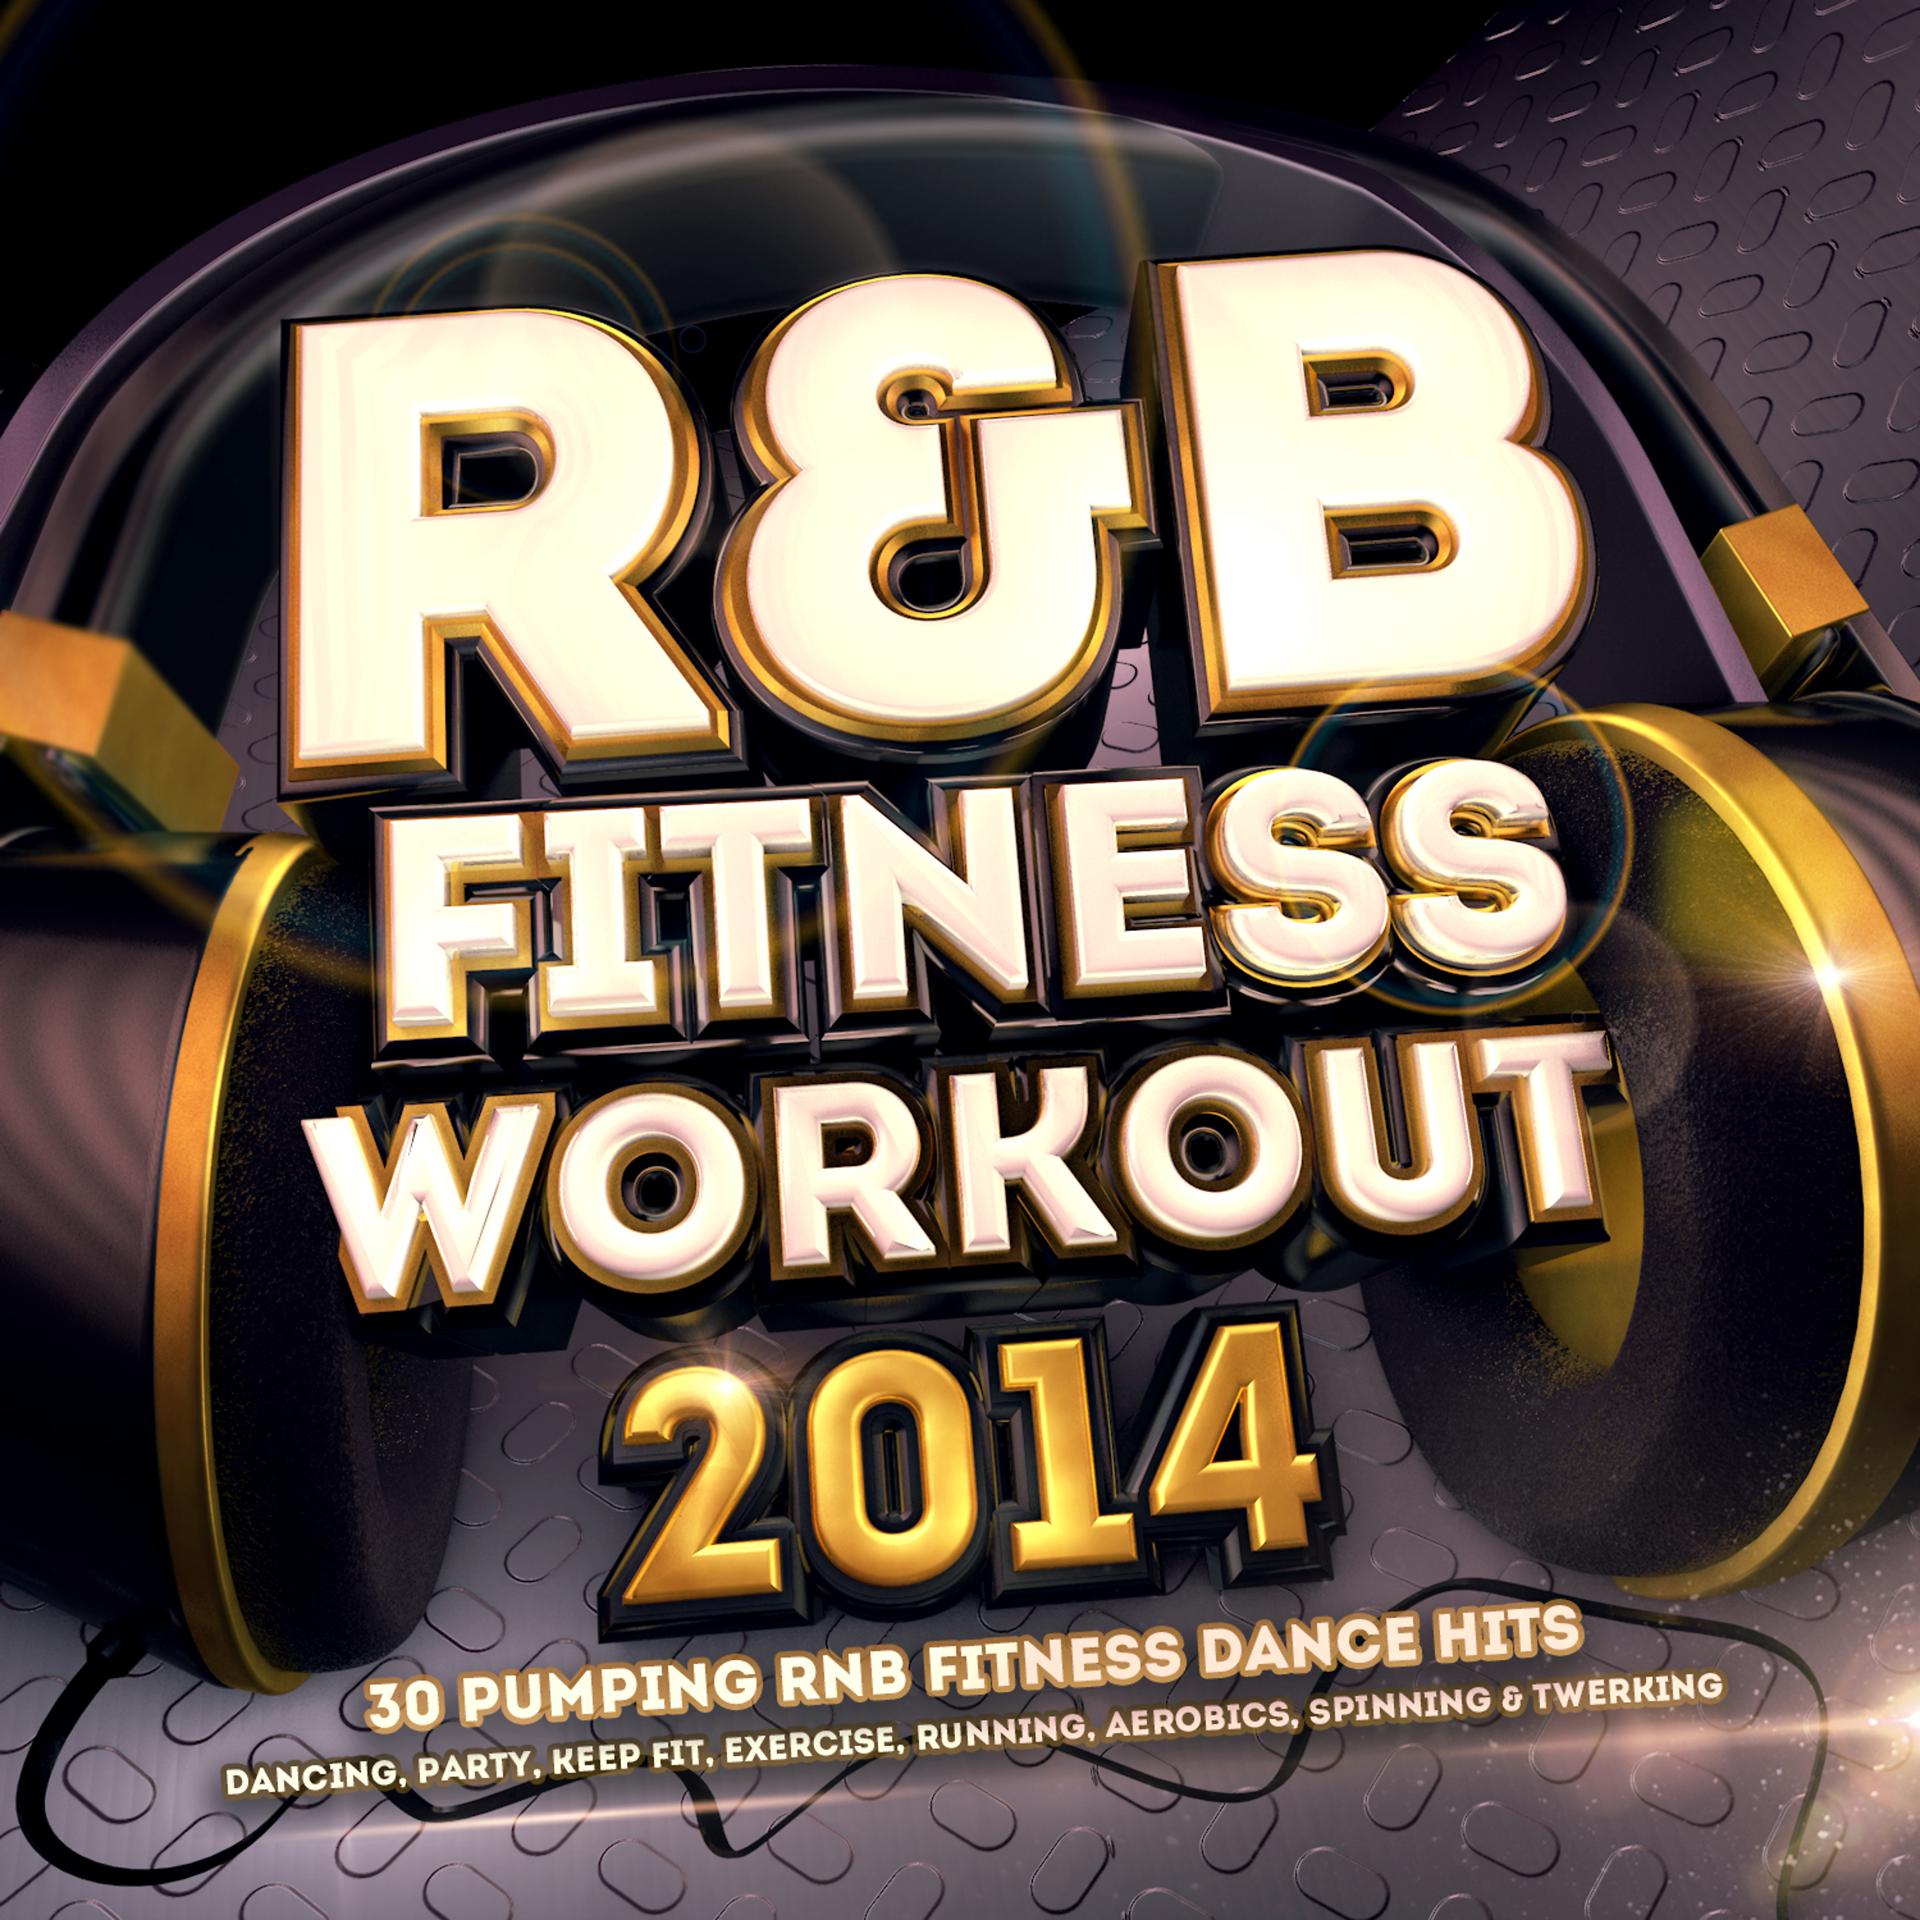 Постер альбома R & B Fitness Workout 2014 - 30 Pumping RnB Fitness Dance Hits - Dancing, Party, Keep Fit, Exercise, Running, Aerobics, Spinning & Twerking